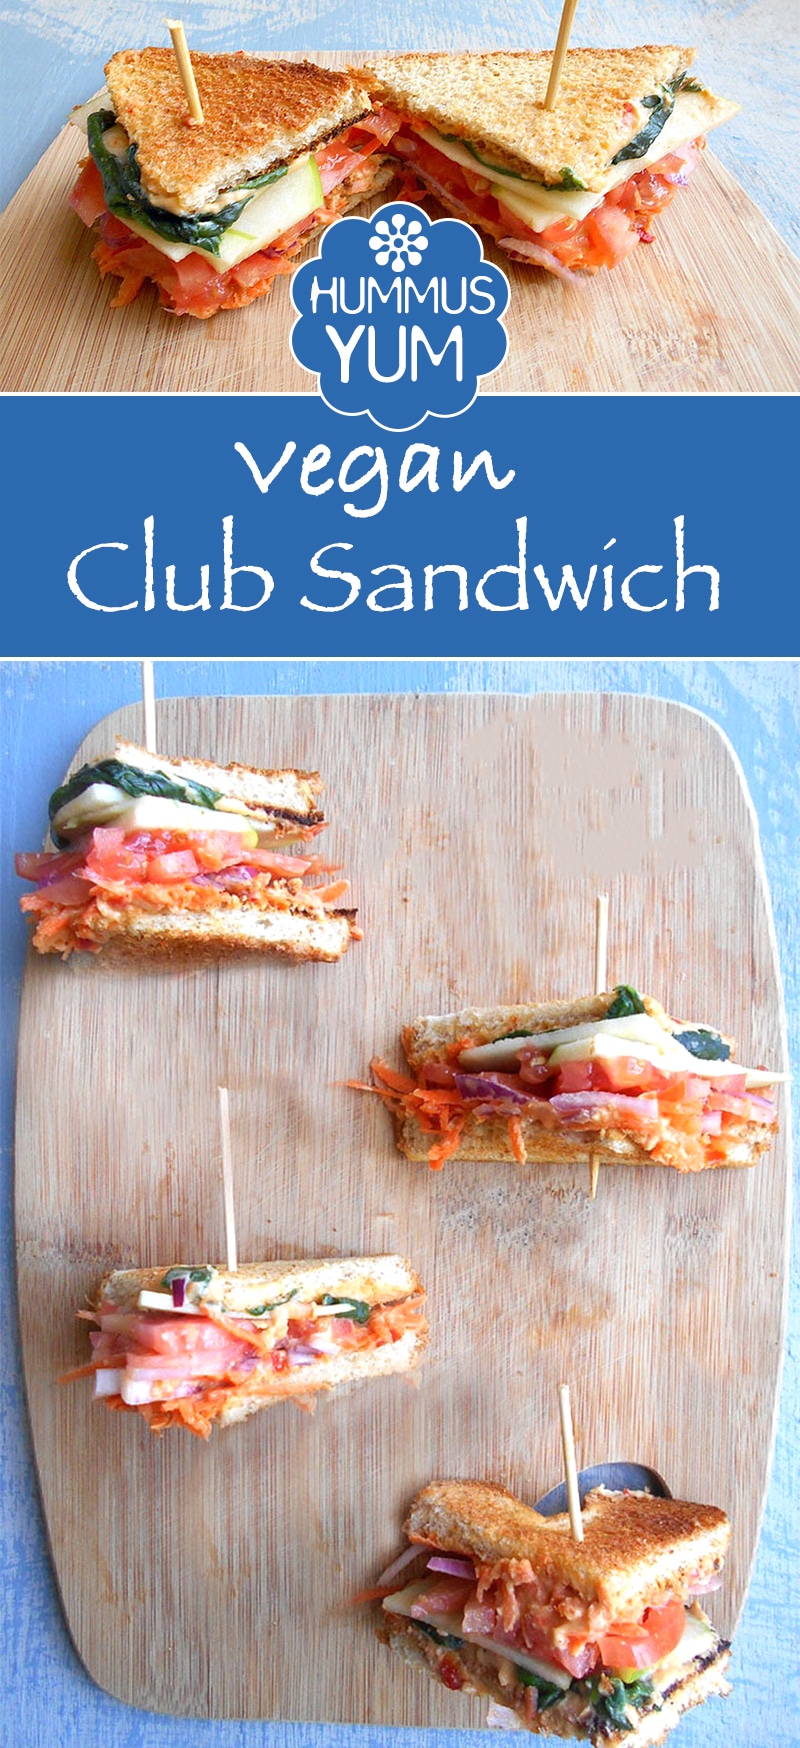 This simple Hummus Club Sandwich is an easy to make recipe that is perfect vegan lunch idea. Made with fresh veggies, apples and Hummus. Can be made in under 30 minutes